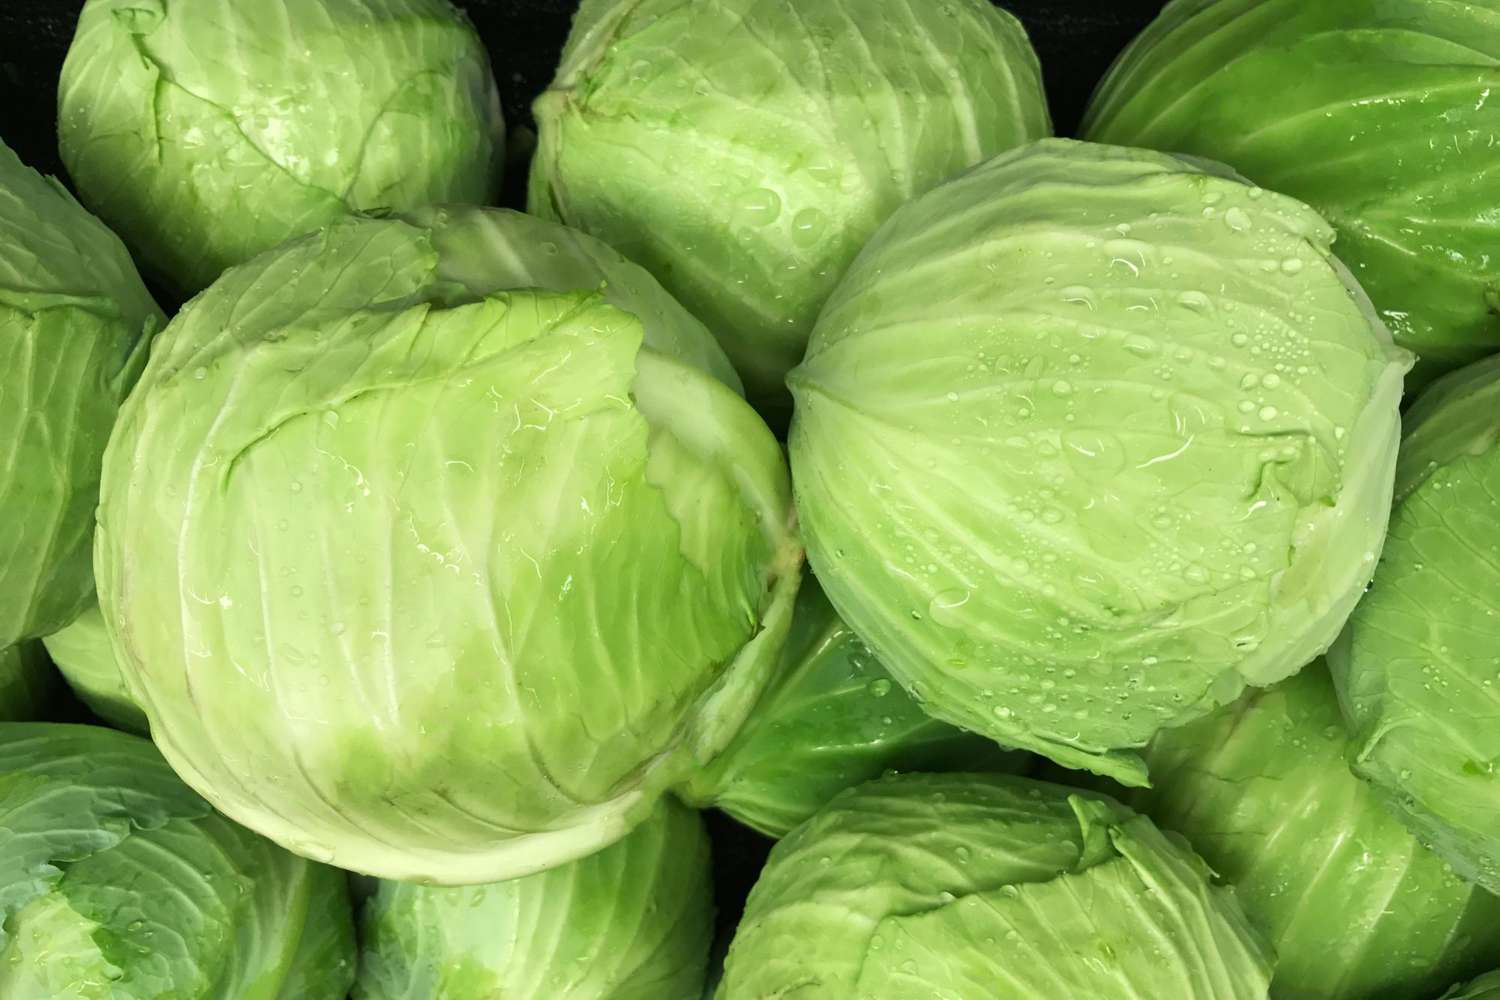 How To Store Cabbage Without Refrigeration